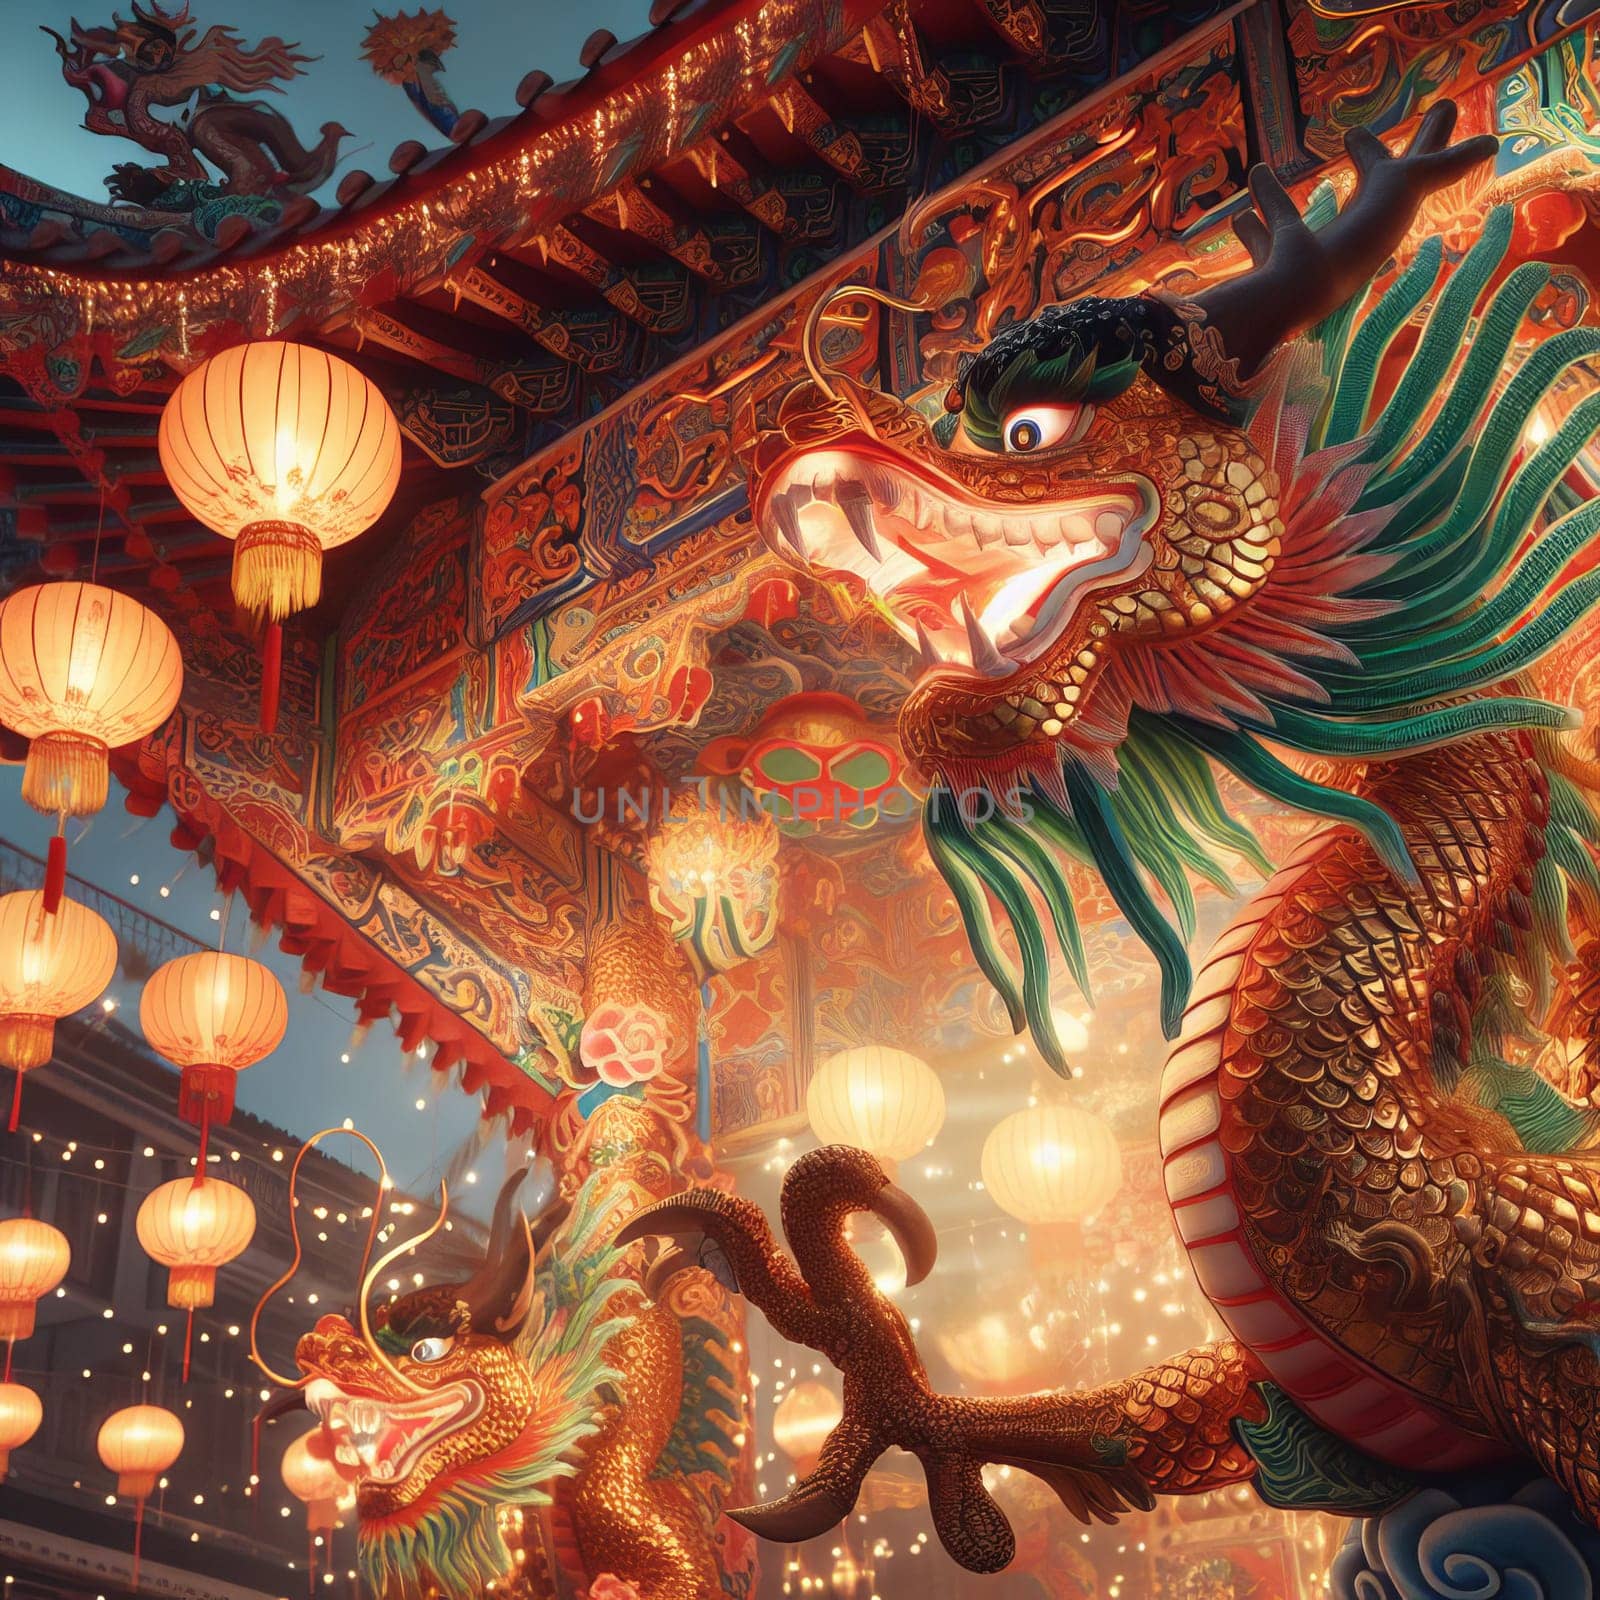 Dragon statue on a temple roof with red lanterns hanging from it. The dragon is green and red with a blue mane and is holding a golden ball in its mouth. by sfinks